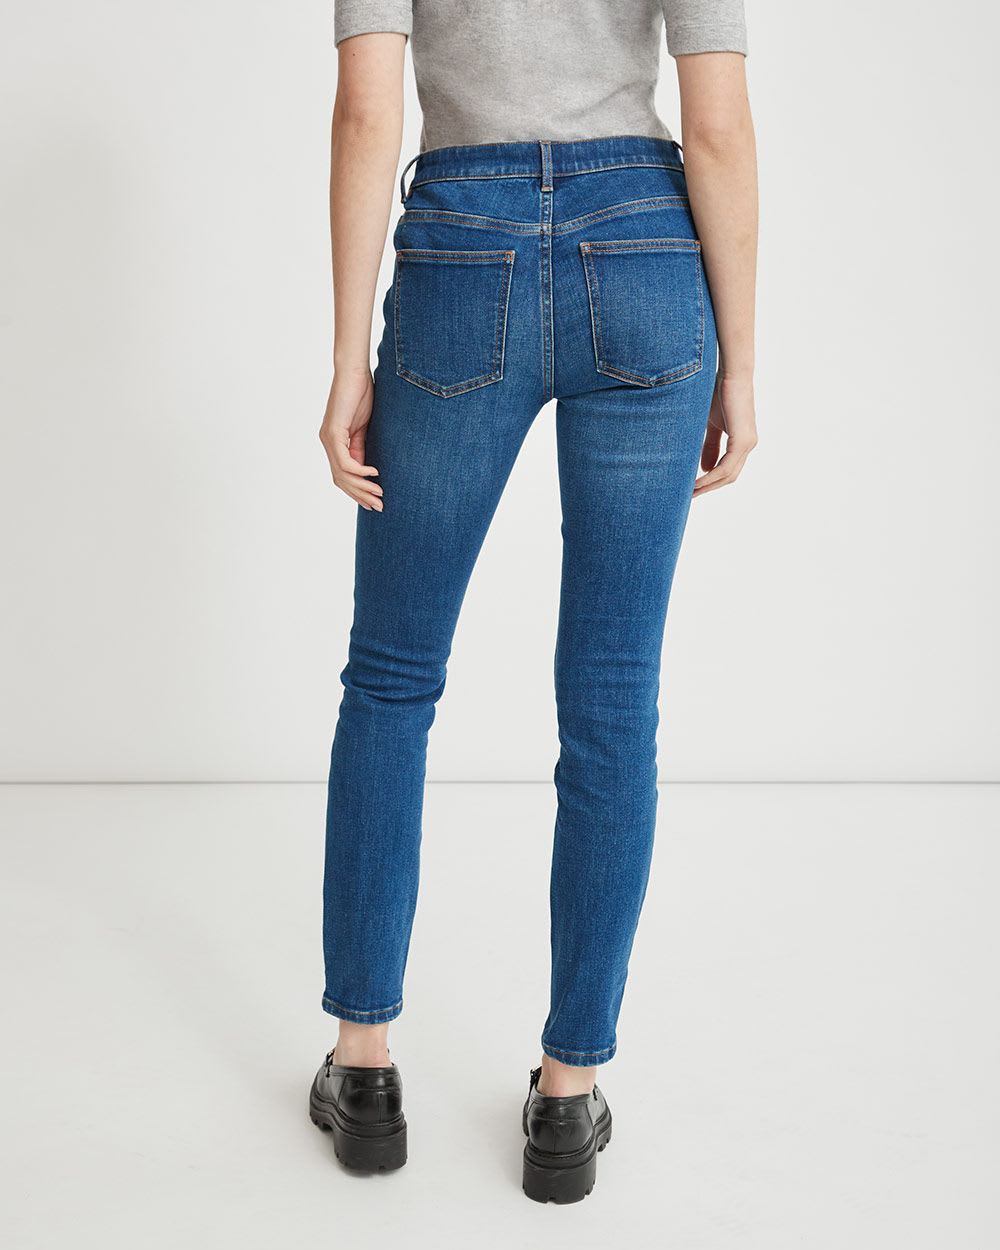 Mid-Rise Skinny Jeans - 30"